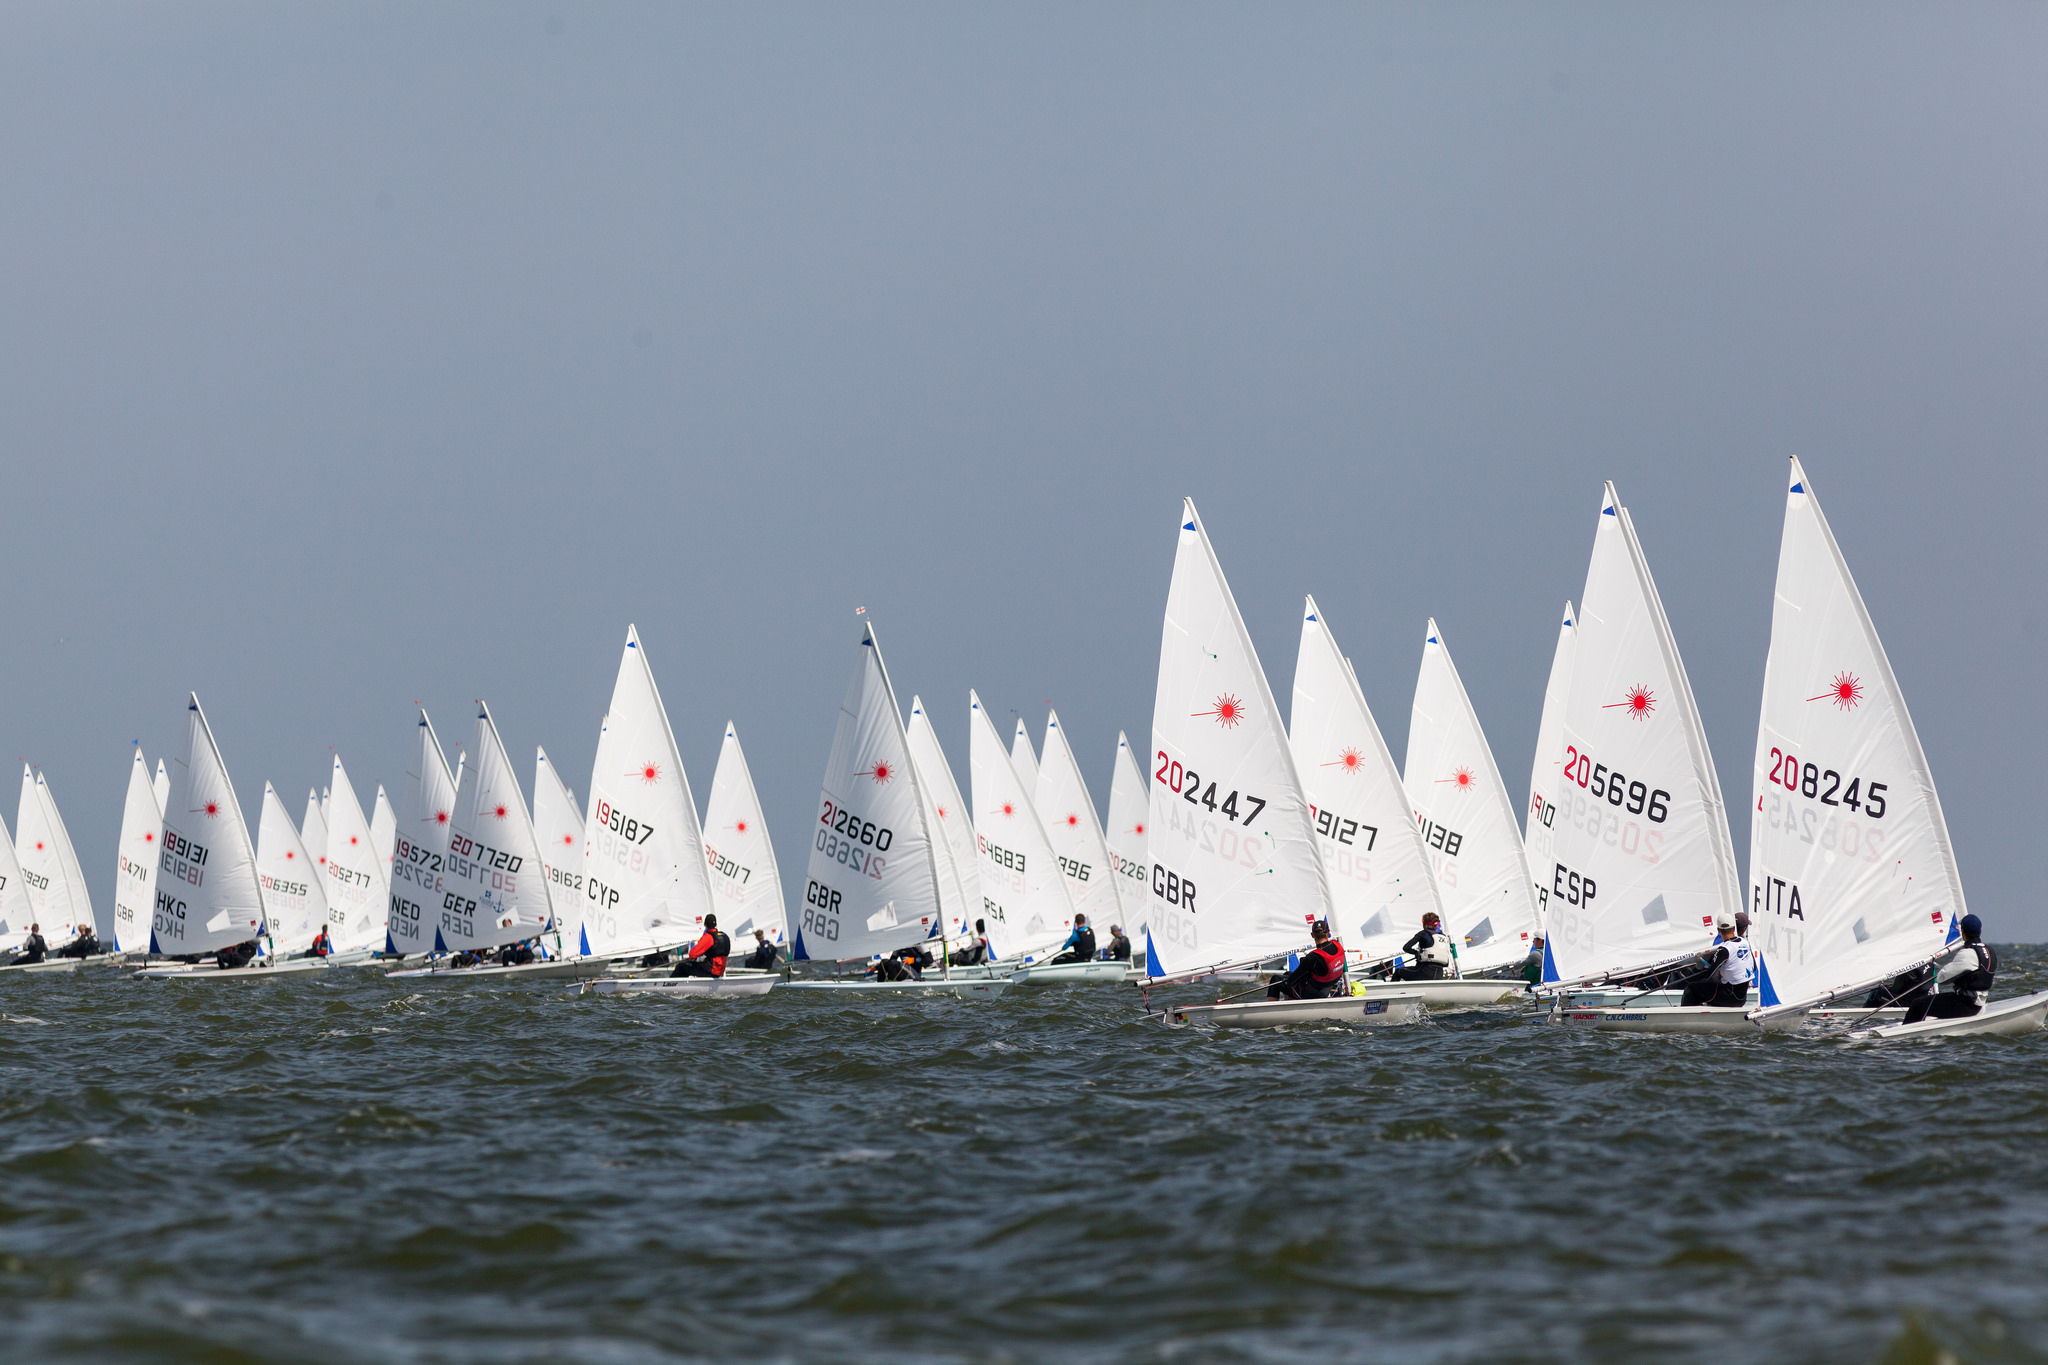  Laser Radial  Youth World Championship 2017  Medemblik NED  Day 2, with USA and CAN delegatons